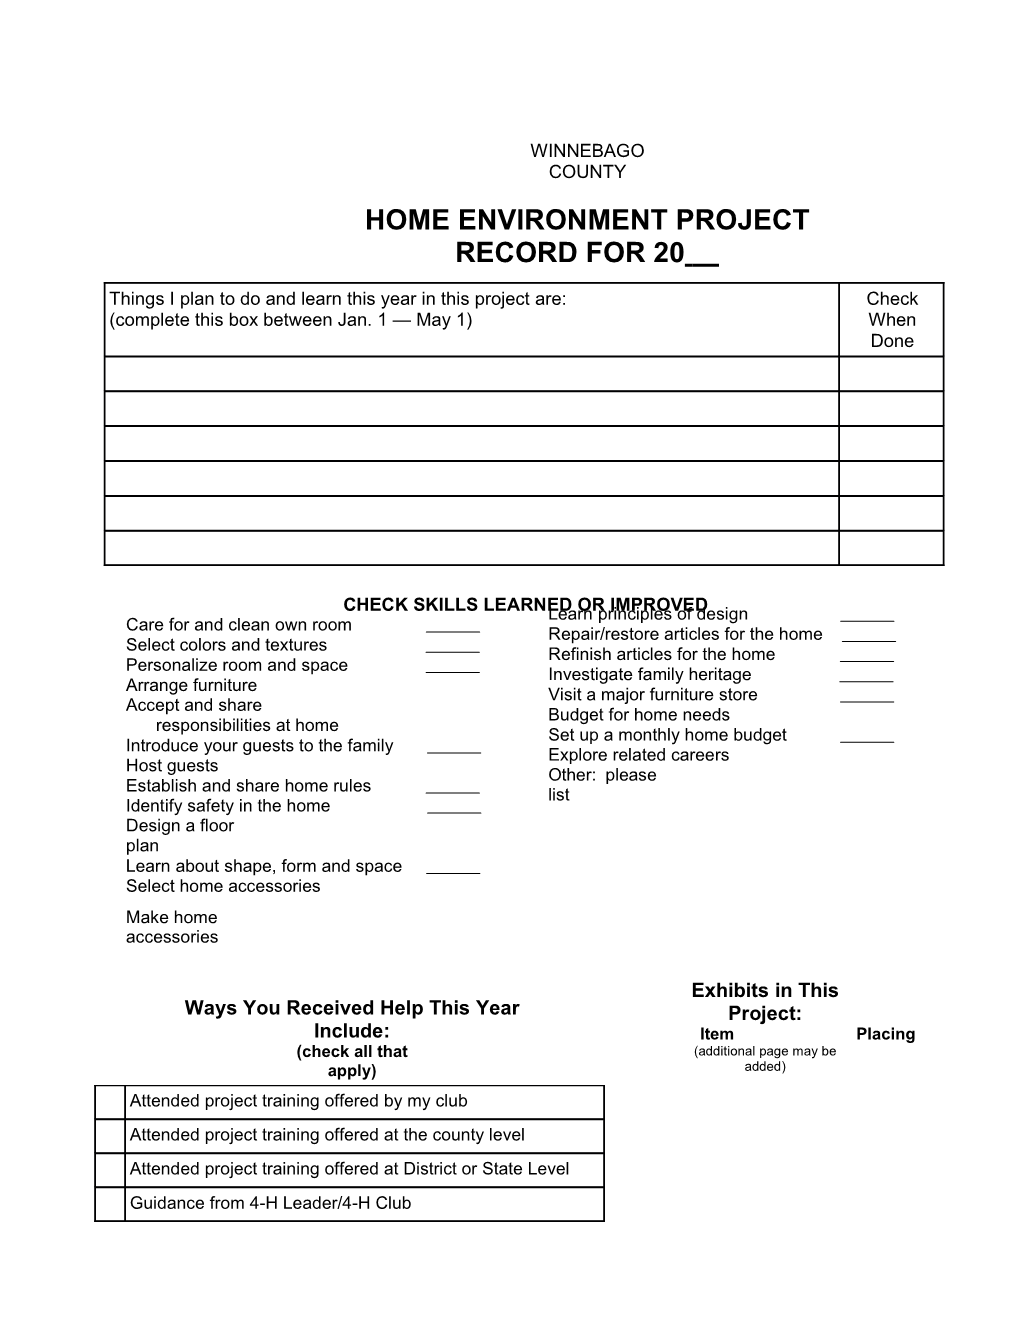 Home Environment Project Record for 20